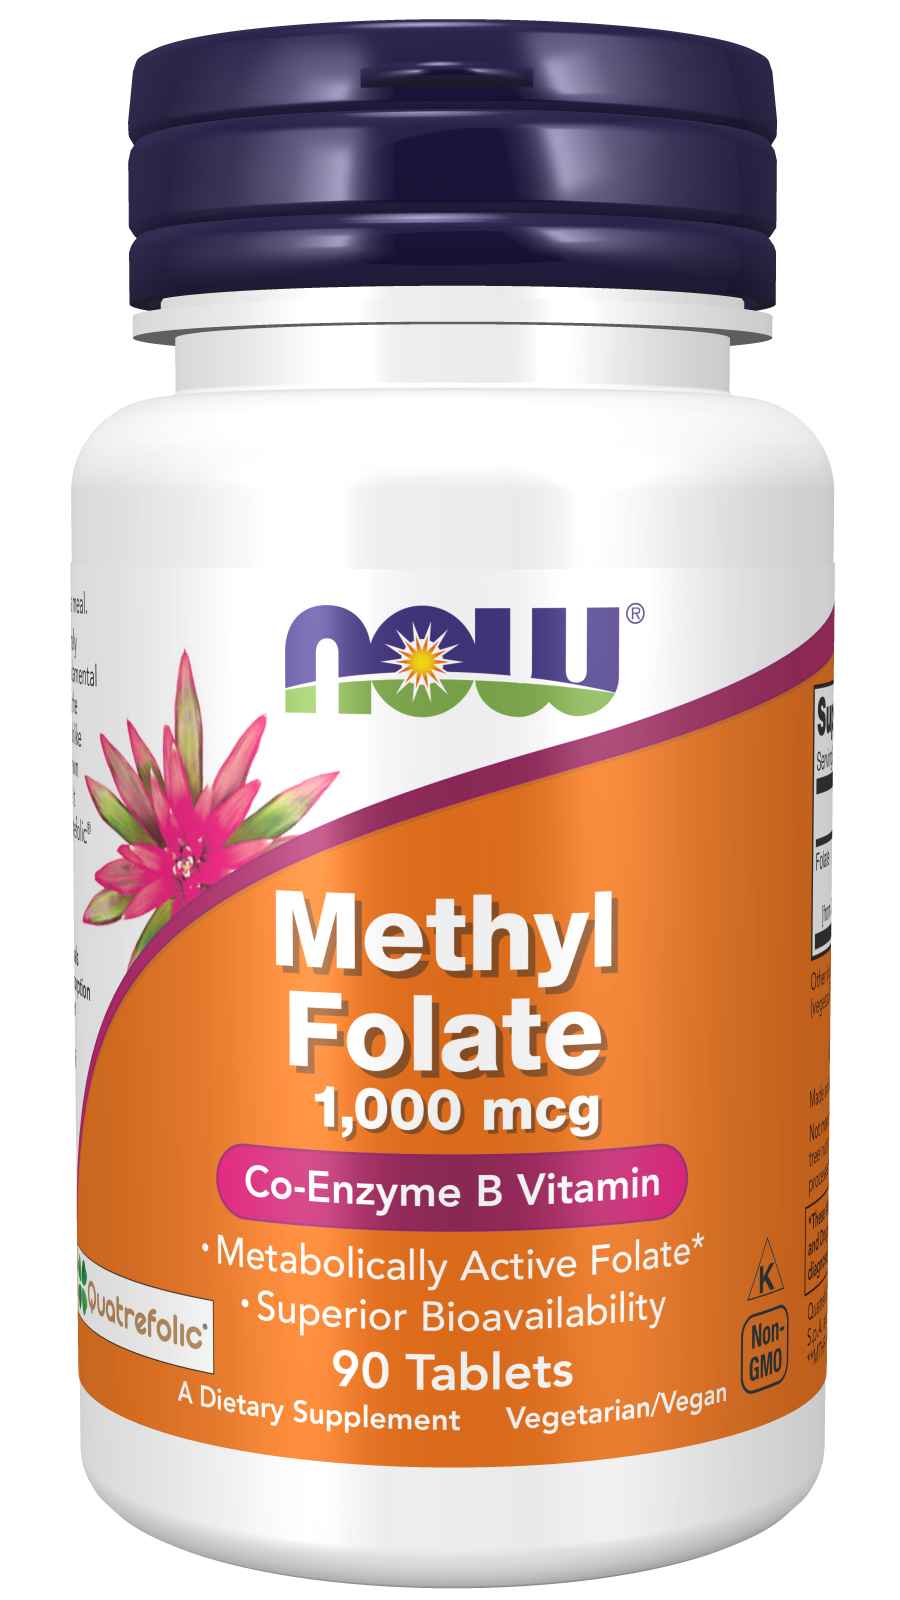 Methyl Folate 1,000 mcg - 90 Tablets bottle front